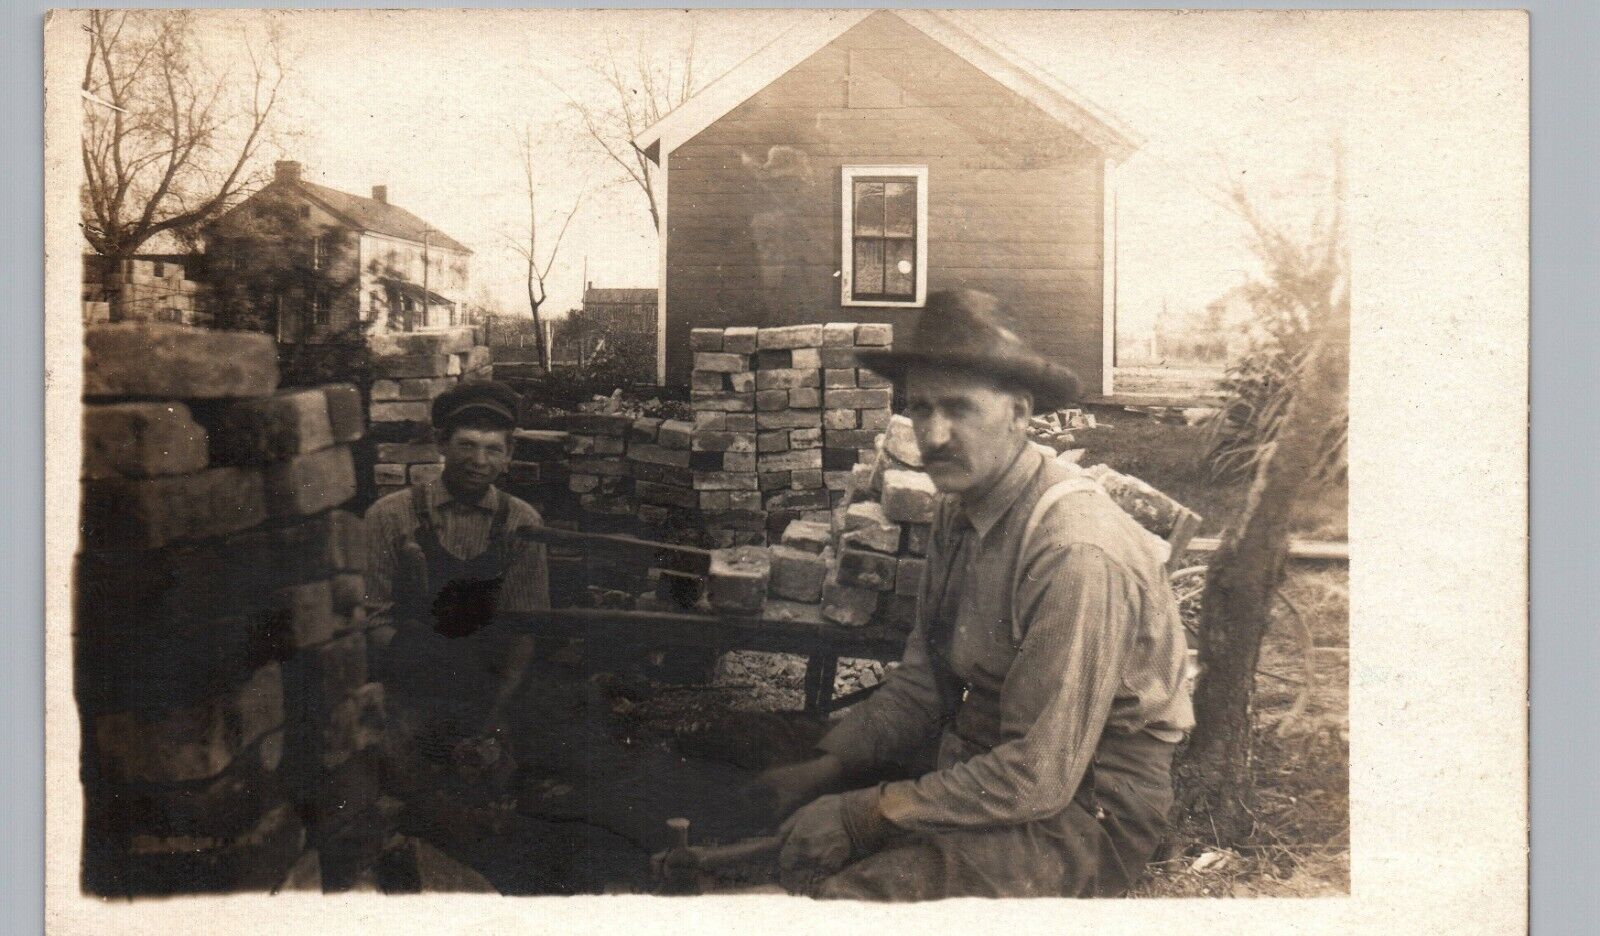 HOUSE CONSTRUCTION CREW brick laying real photo postcard rppc occupational work